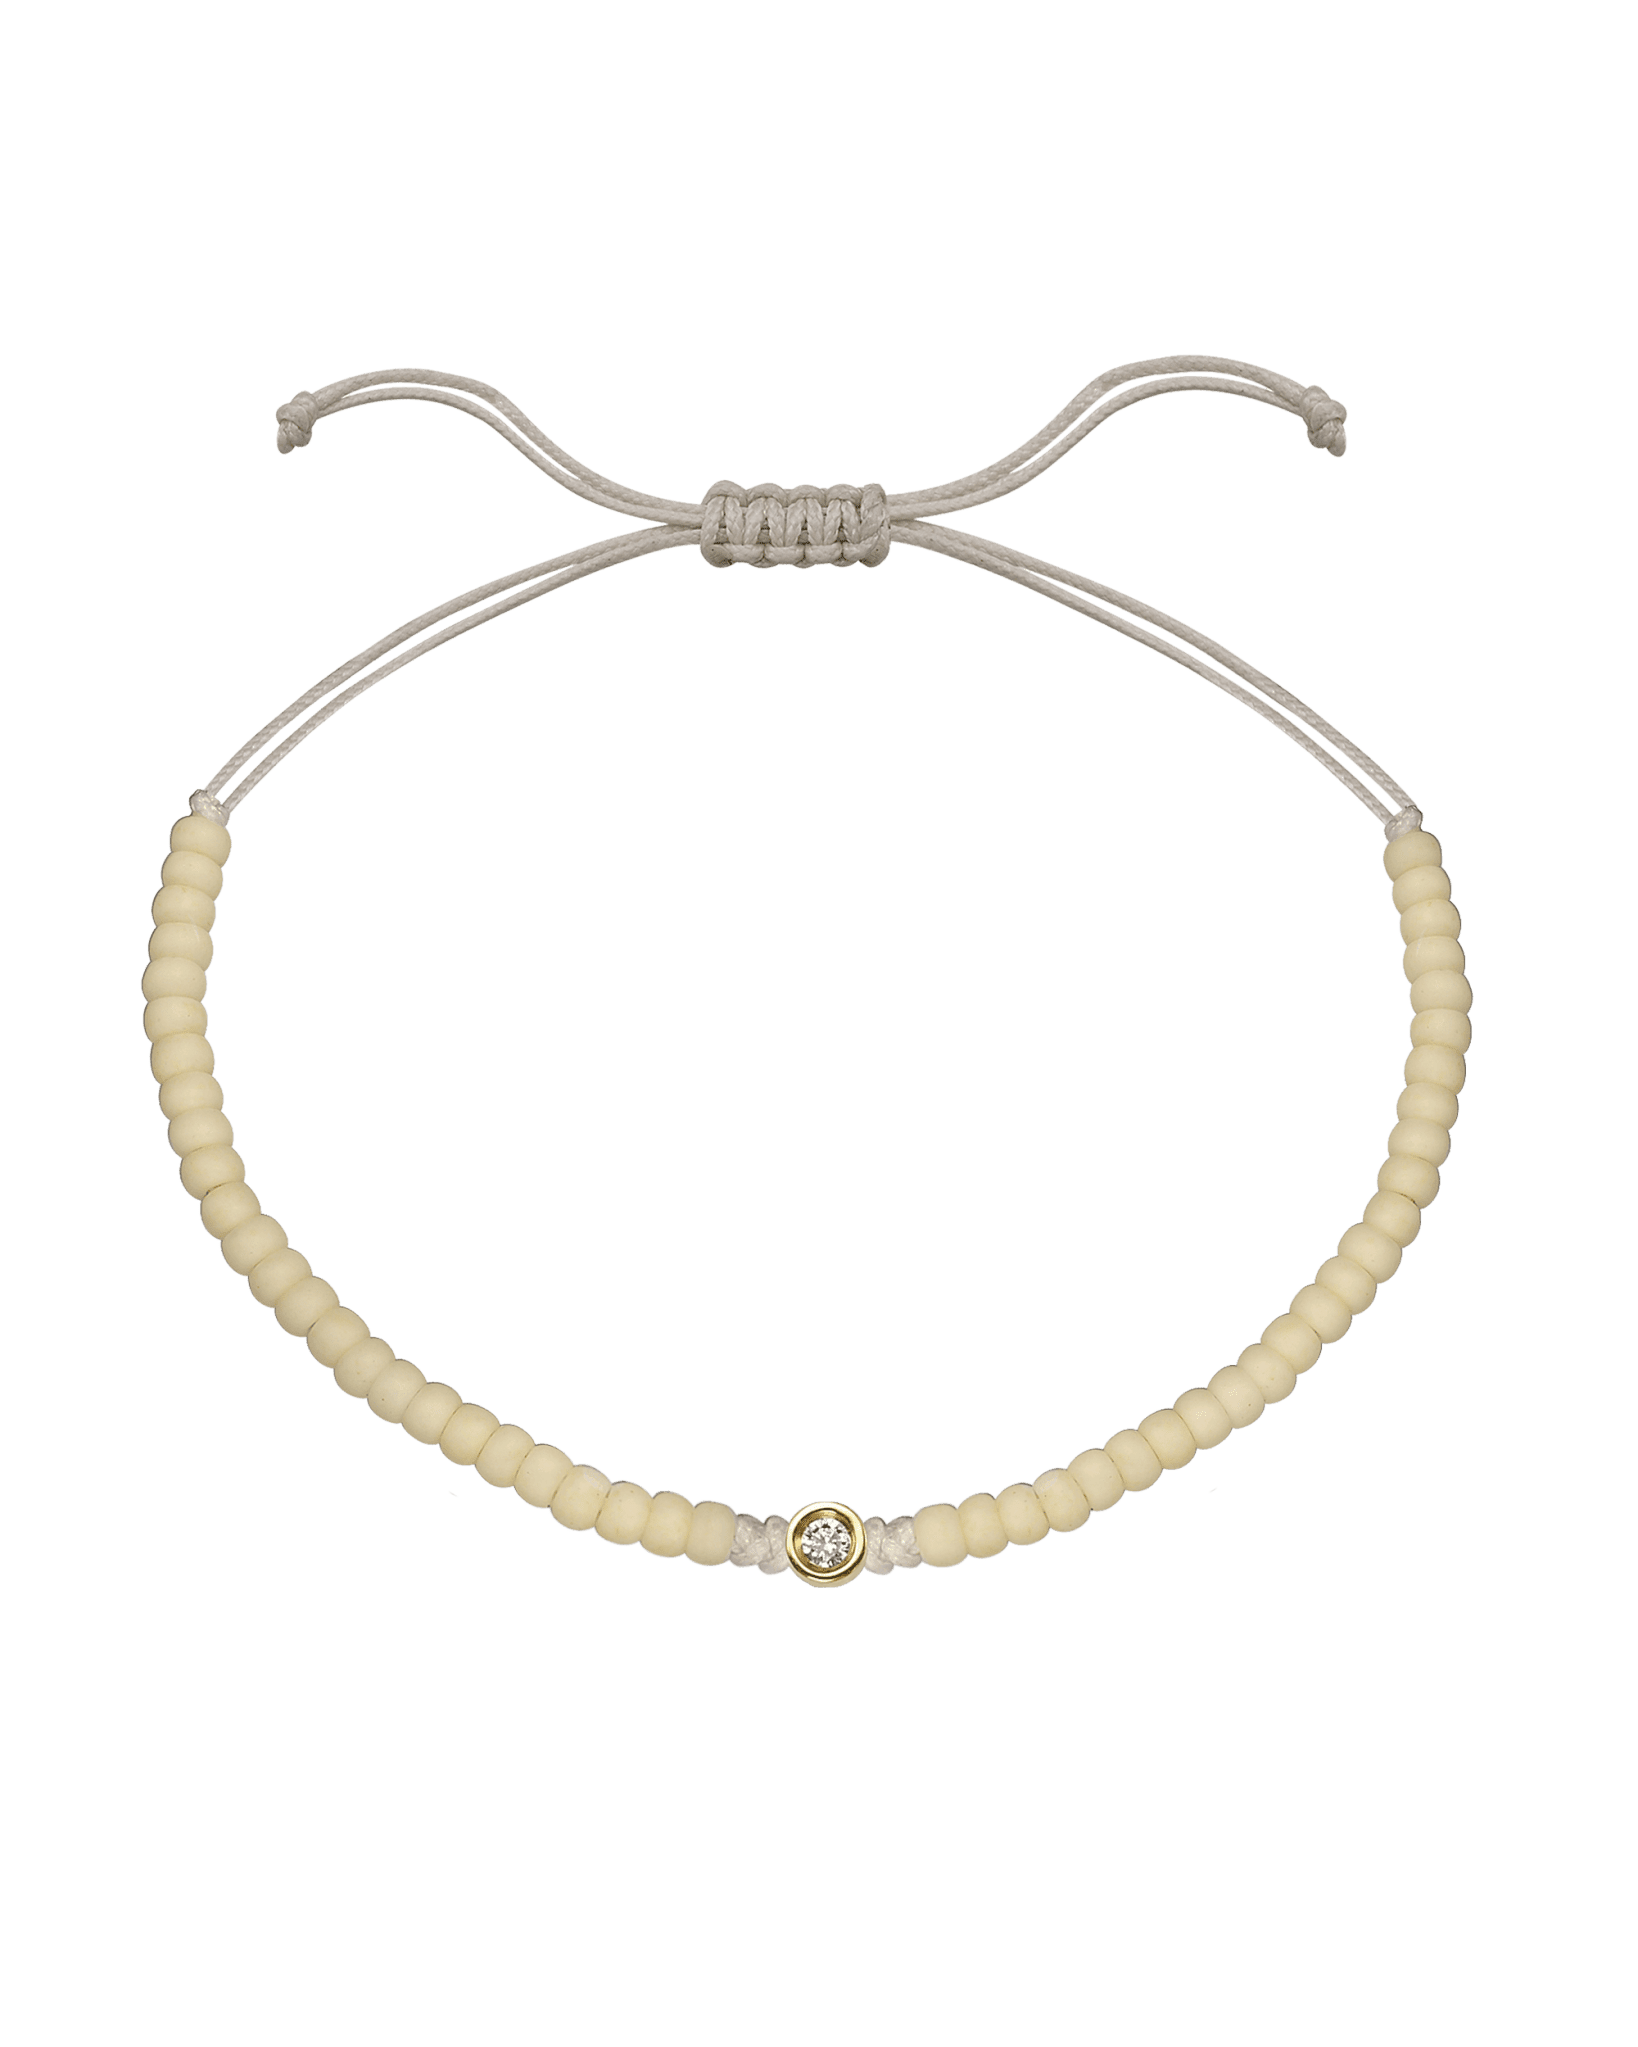 Off White Beads String of Love - 14K Yellow Gold Bracelets magal-dev Small: 0.03ct 